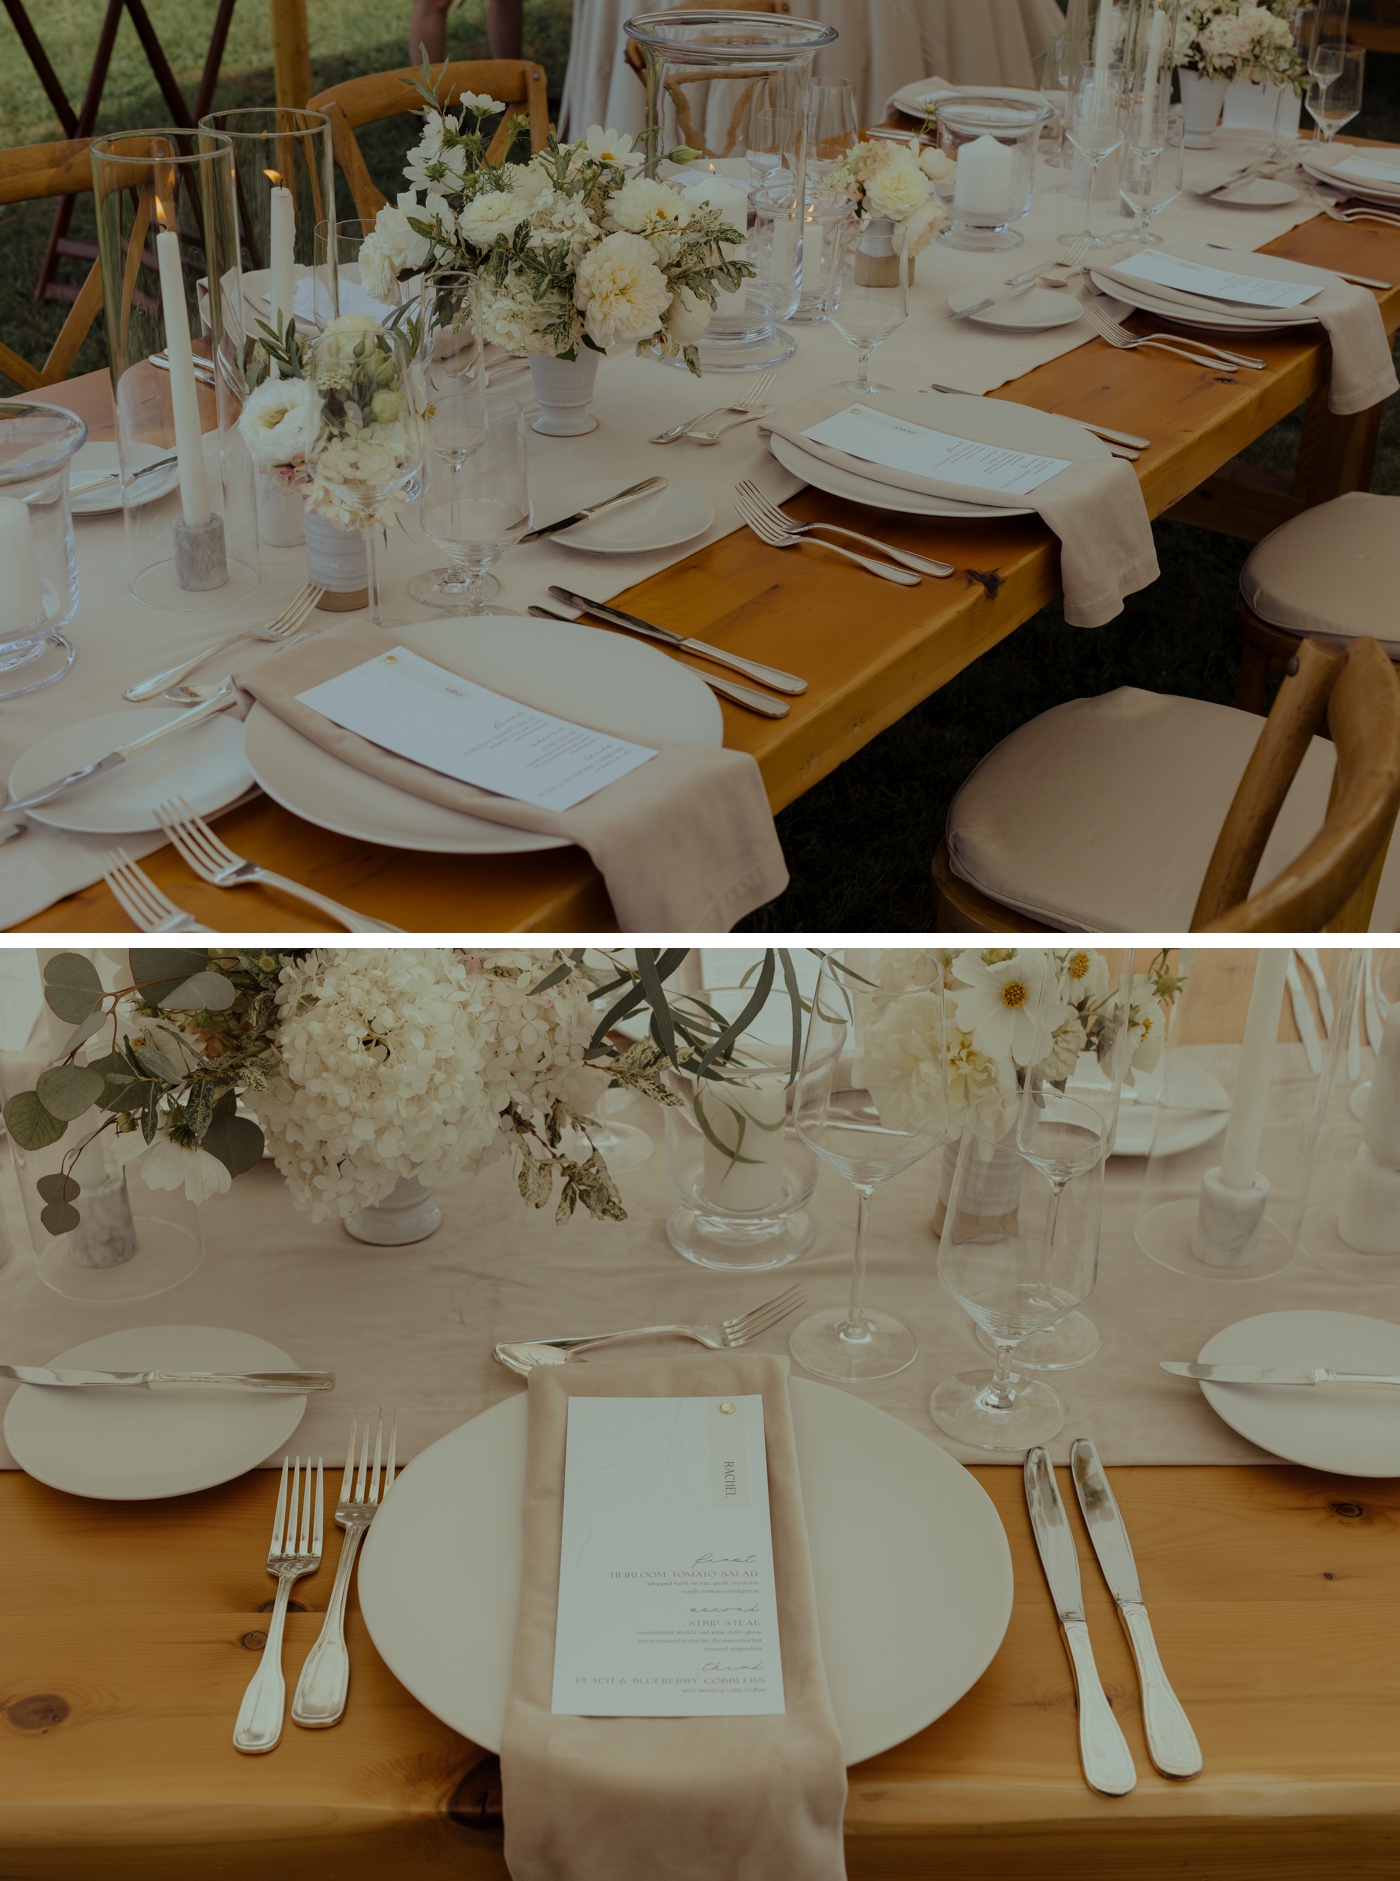 Beige linens, white tapers, and white florals on a farm table for a neutral wedding reception